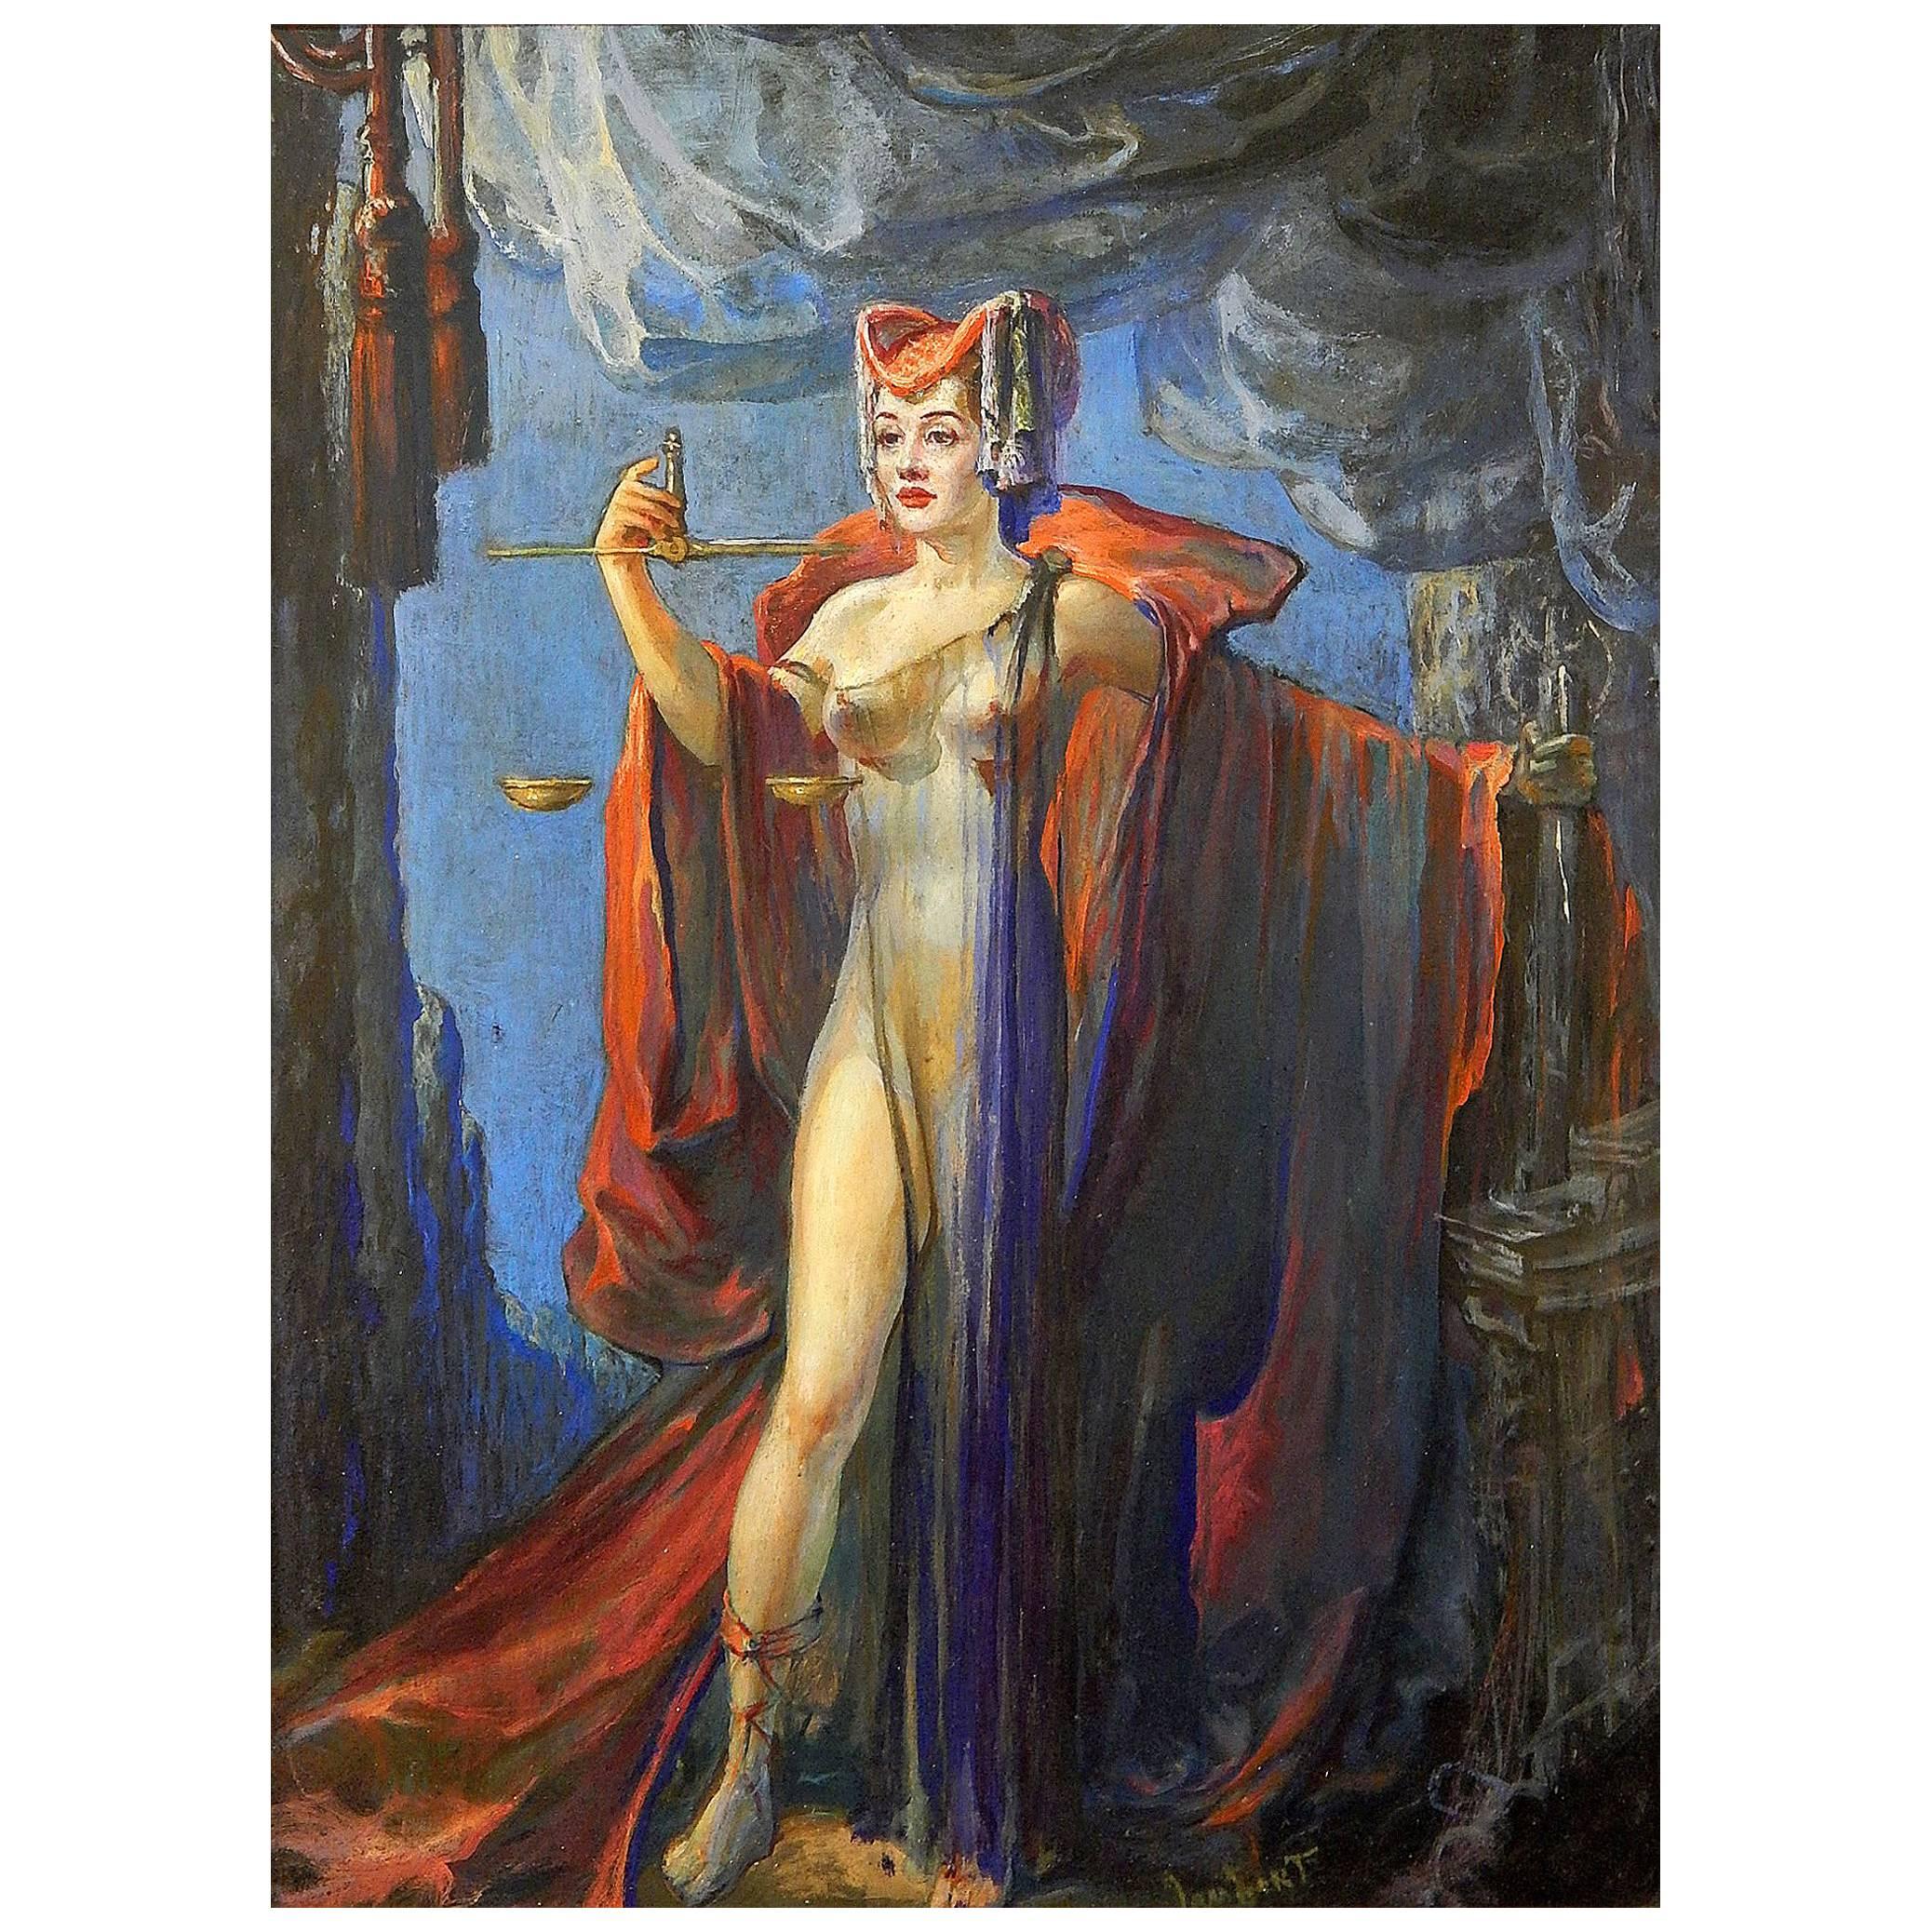 "Justice in Hollywood, " Fabulous Art Deco Depiction of Allegorical Nude Female